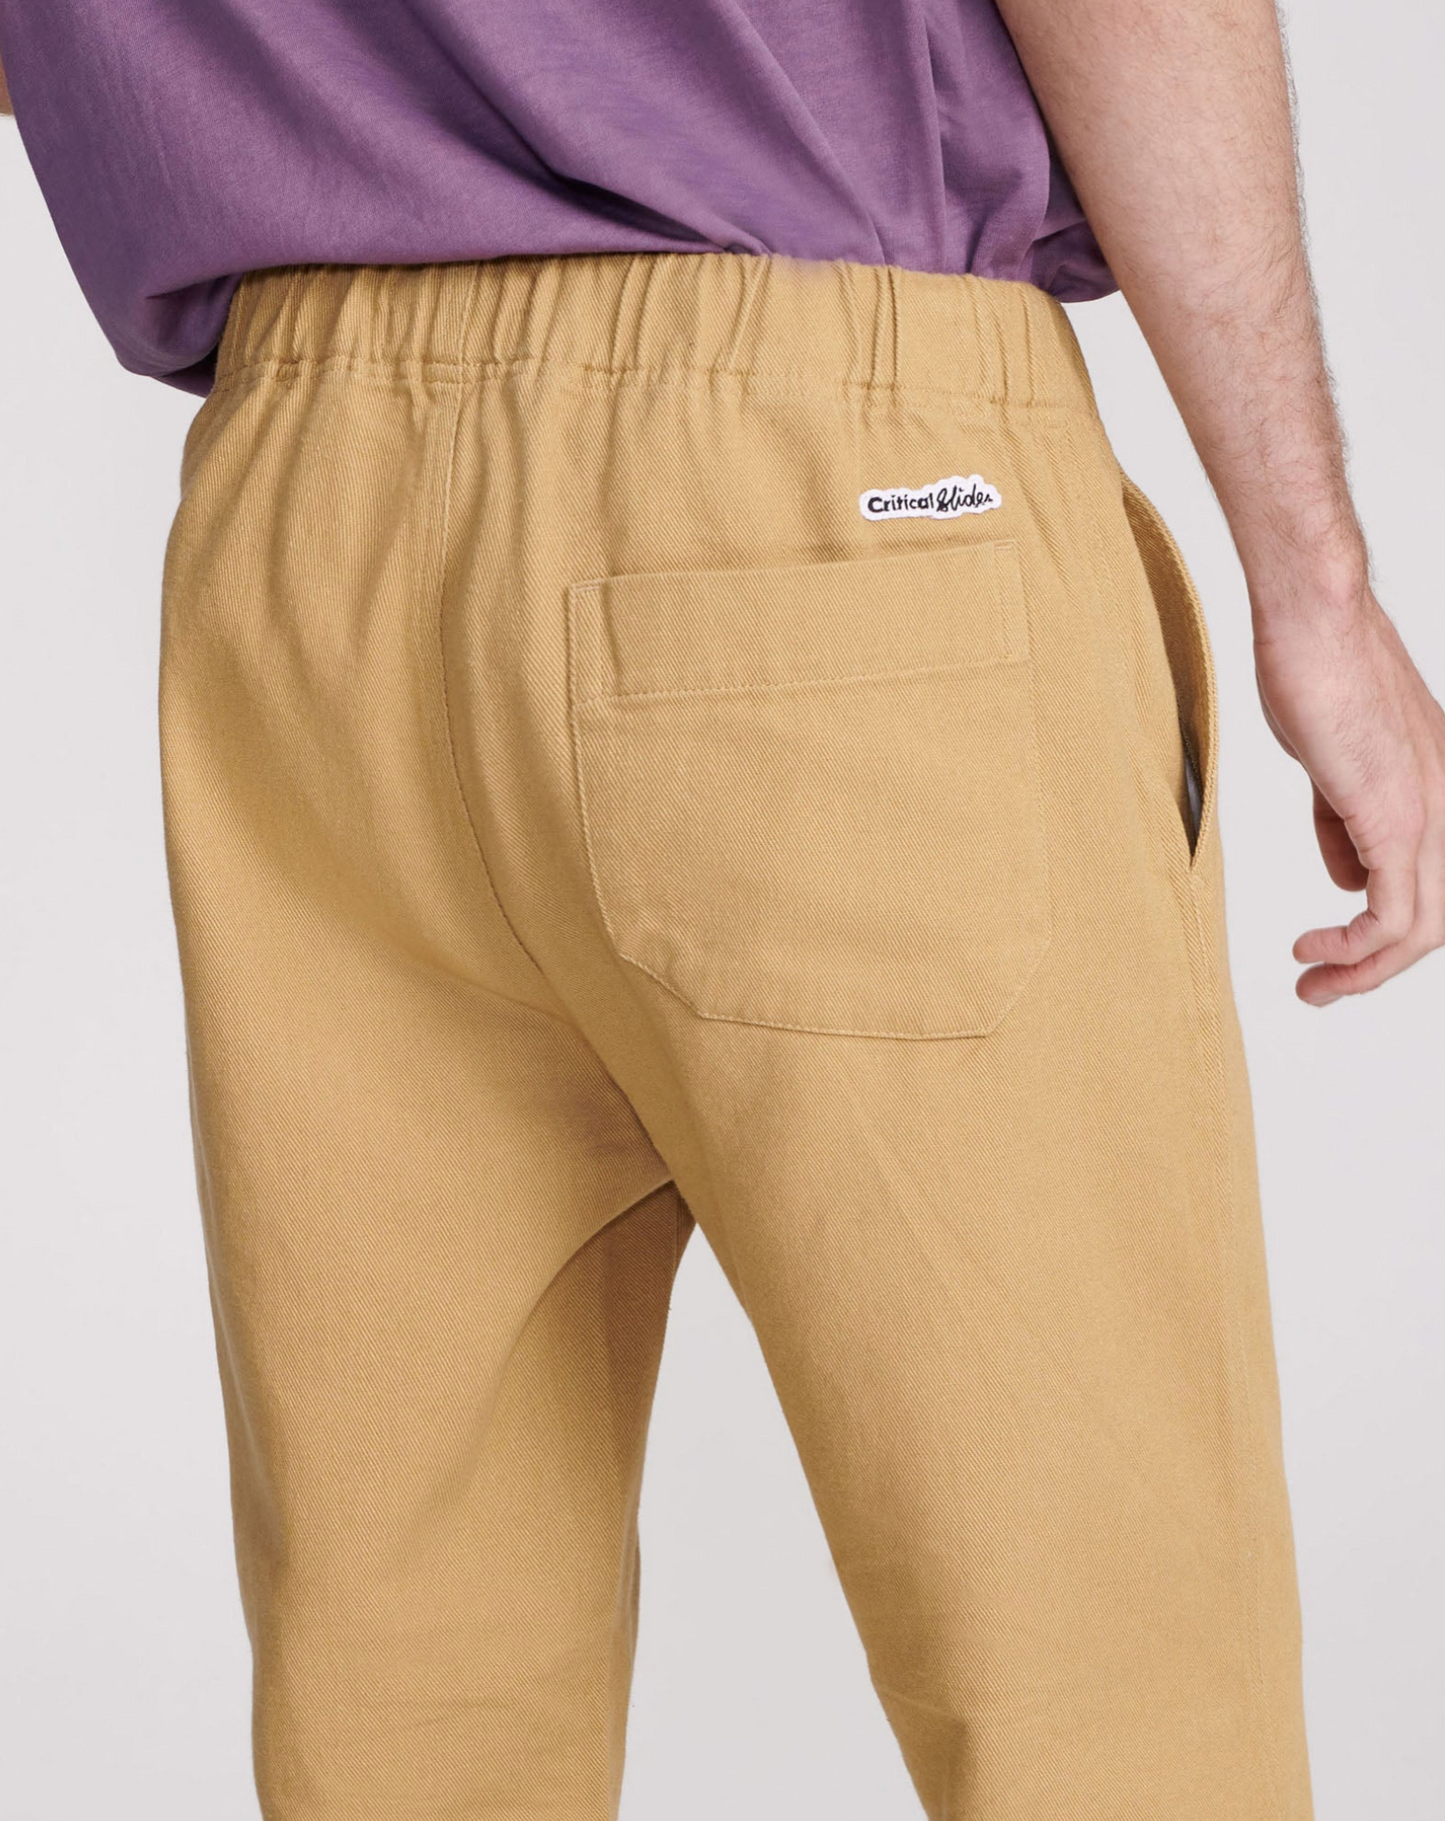 Critical Slide Society All Day Twill Pant